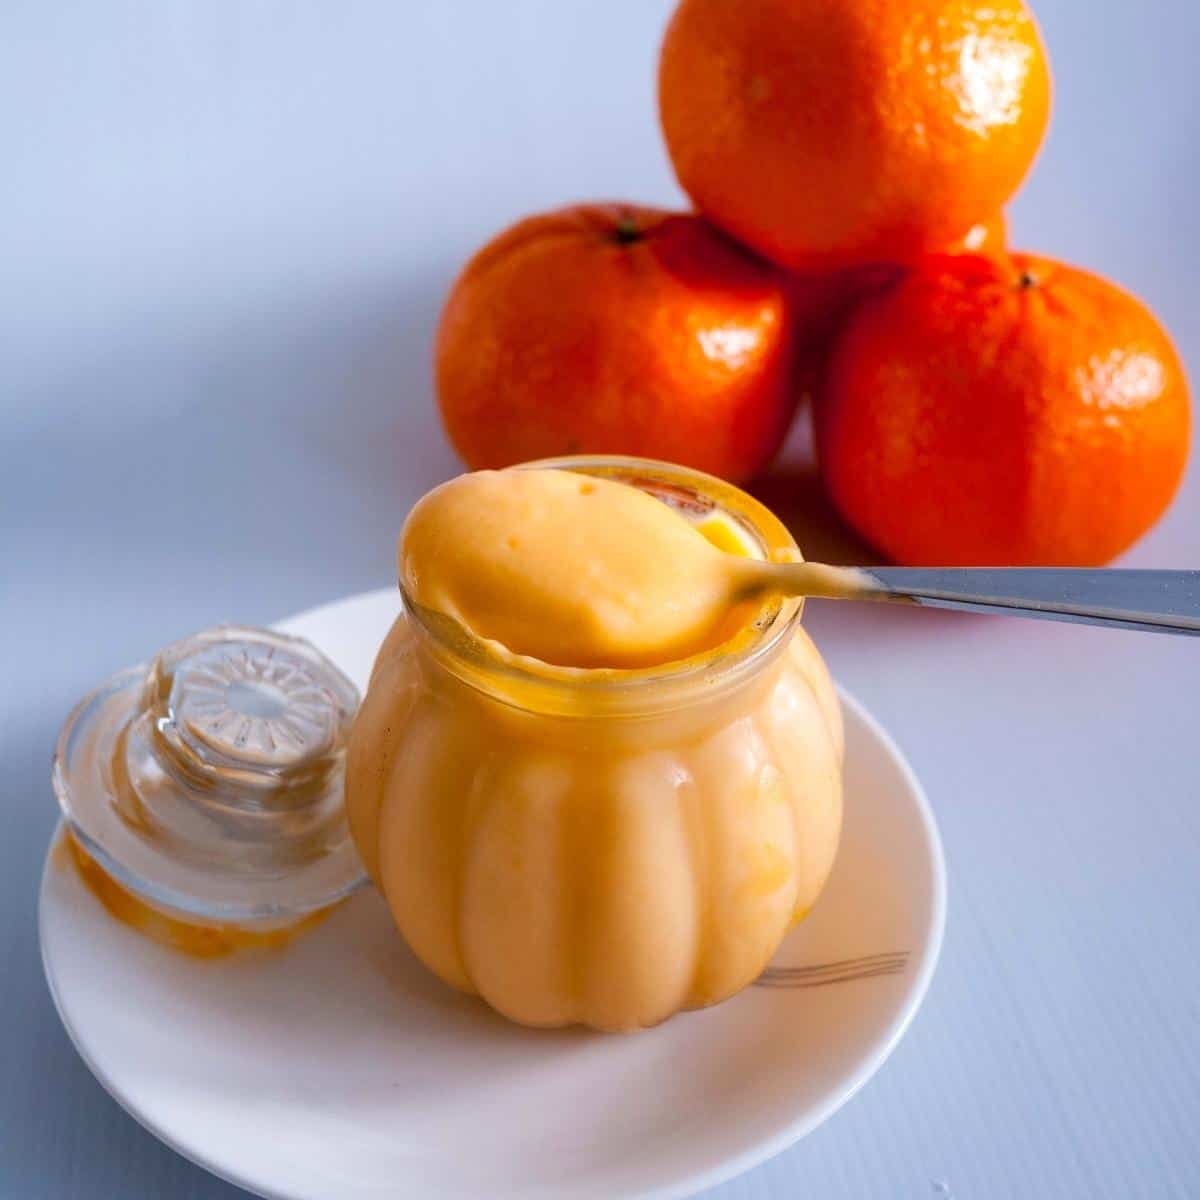 A jar and spoon with curd filling and oranges